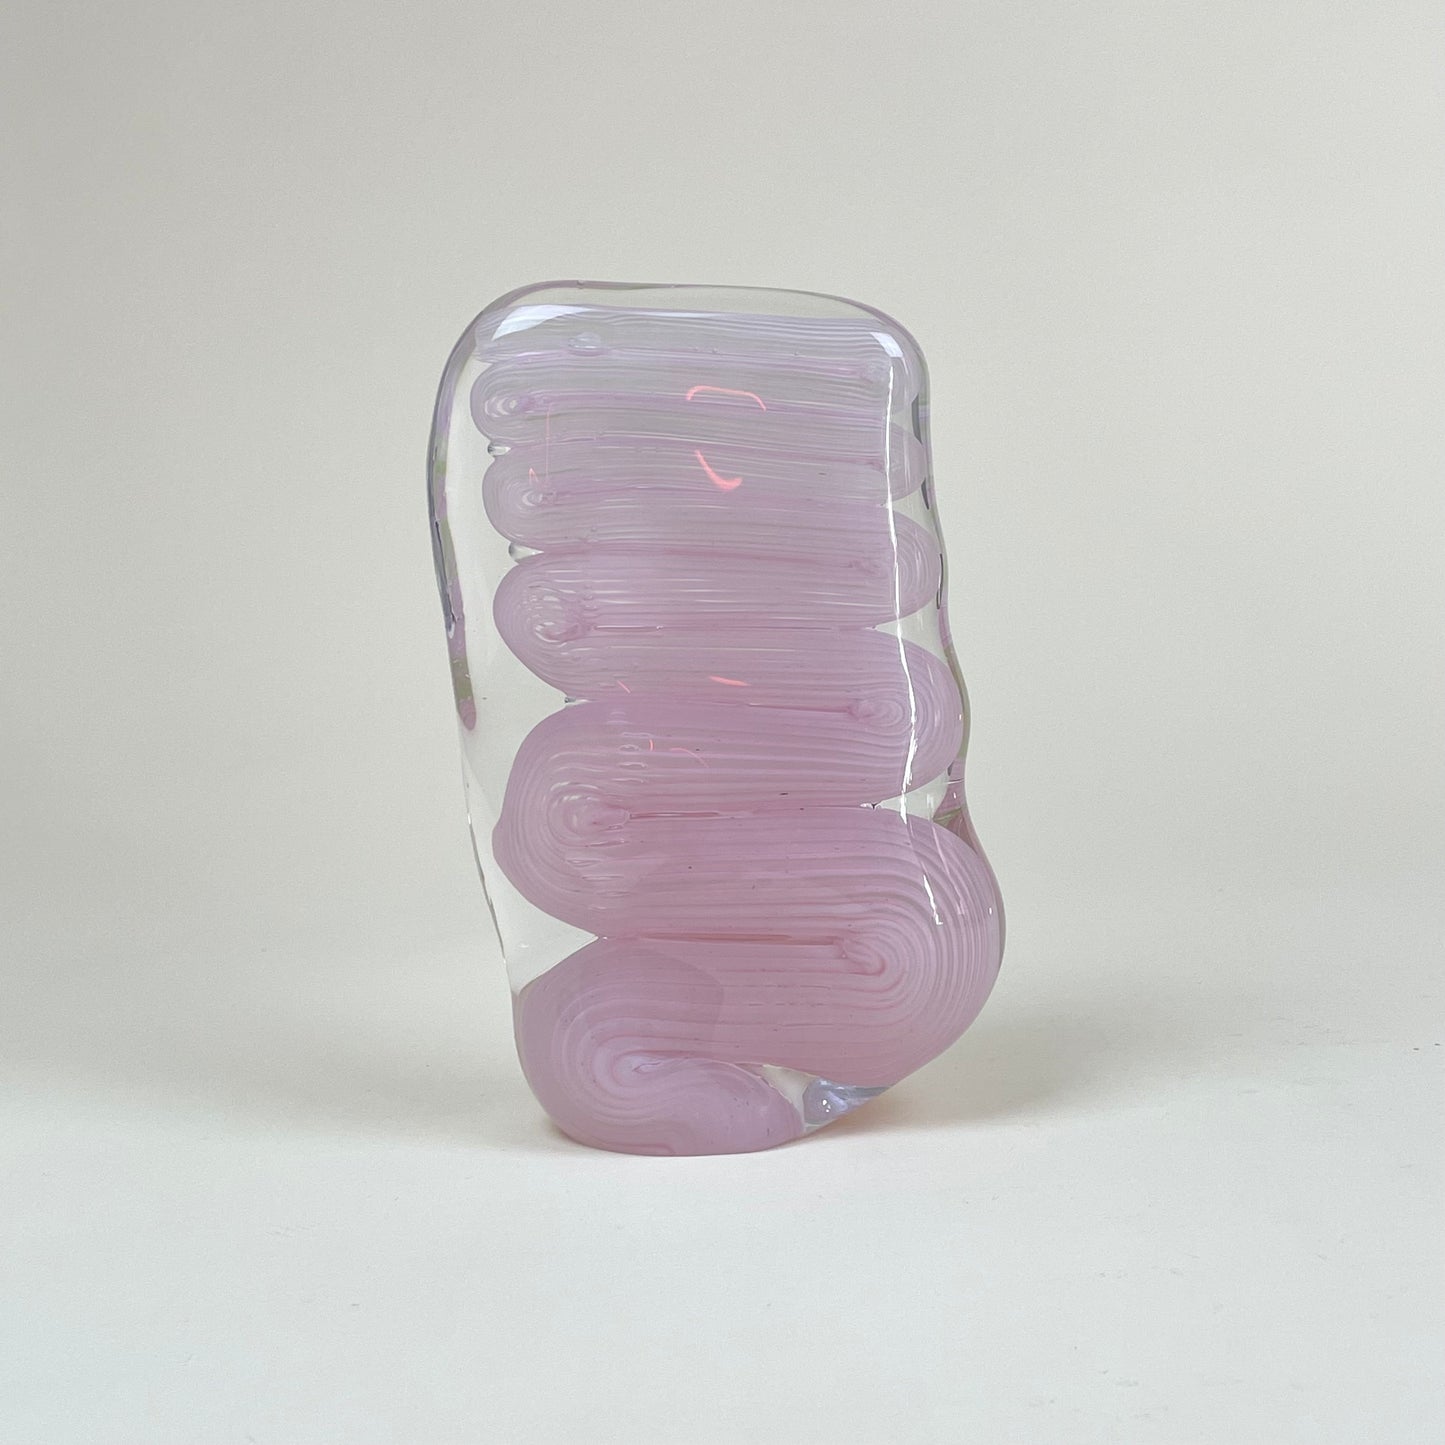 Capsuled scribble, glass sculpture by Rasmus Nossbring